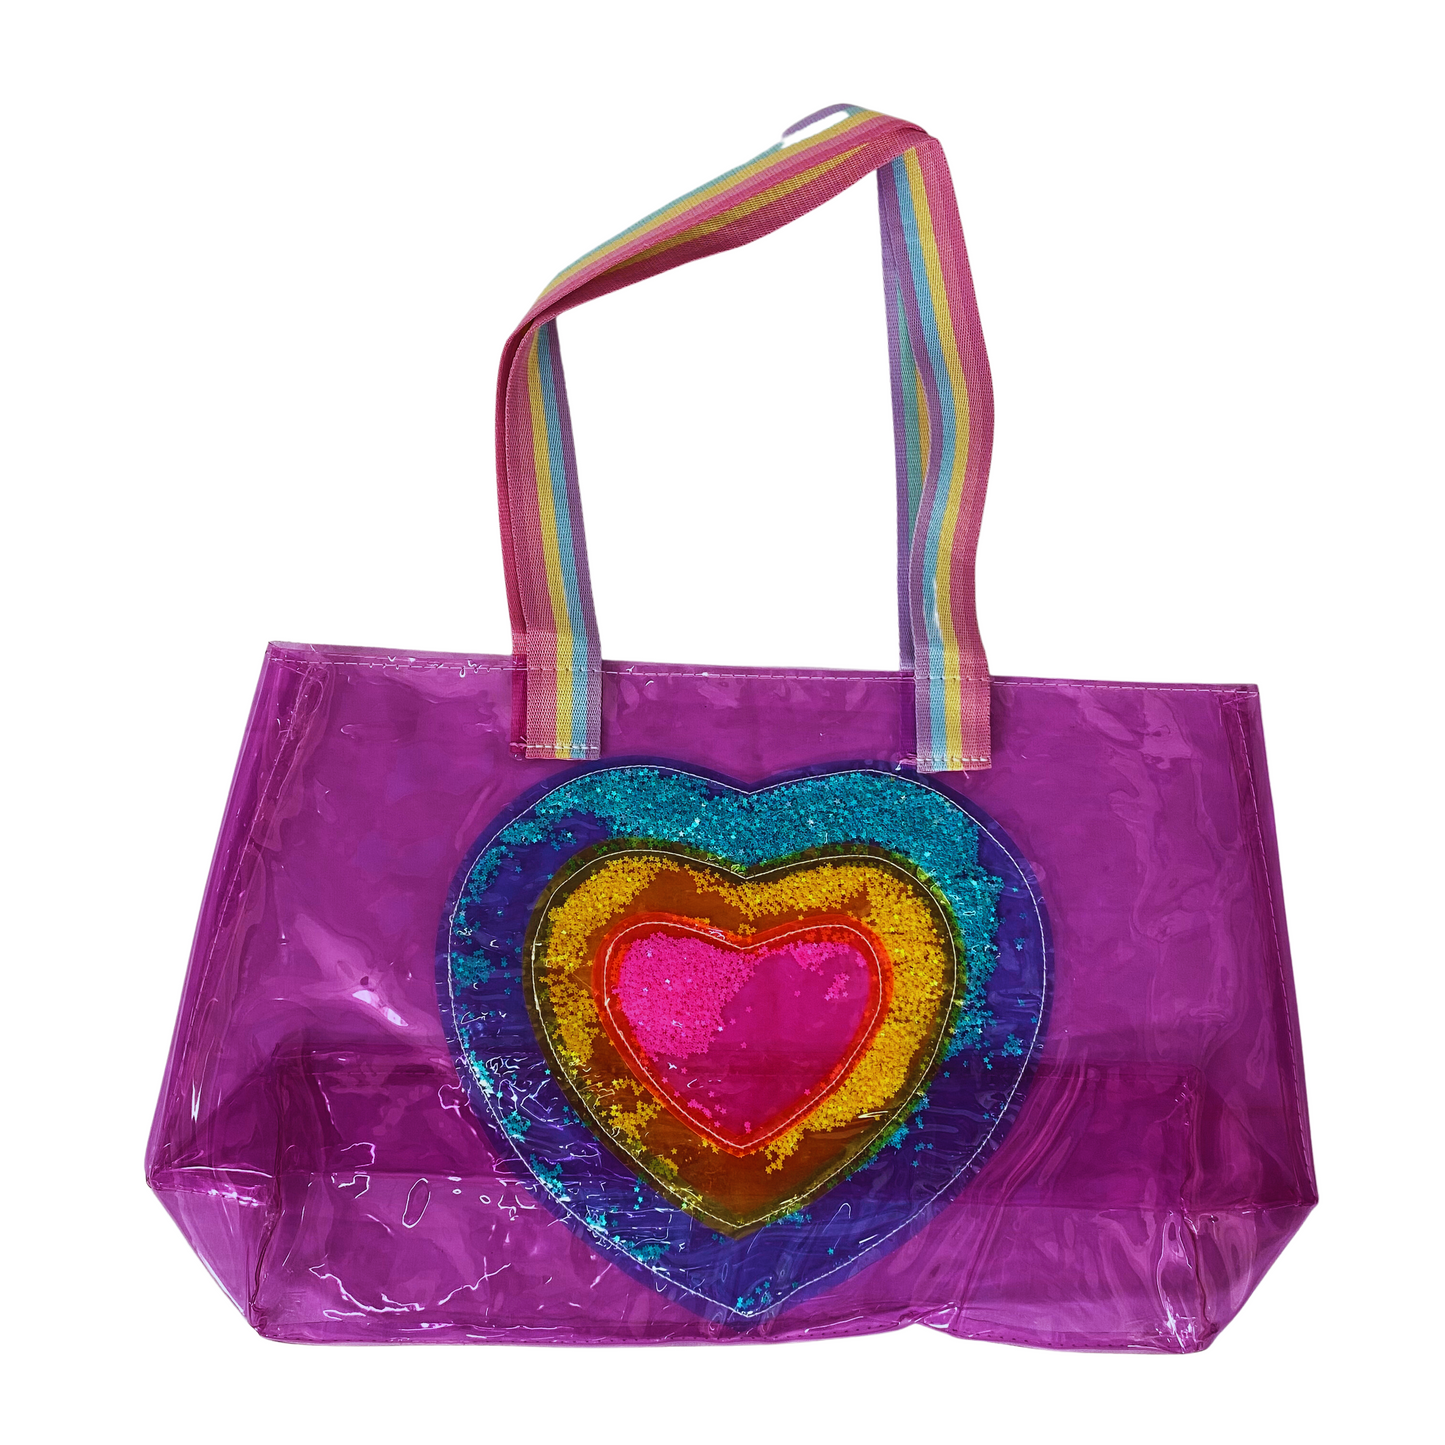 Trendy and Functional Clear Tote Bag